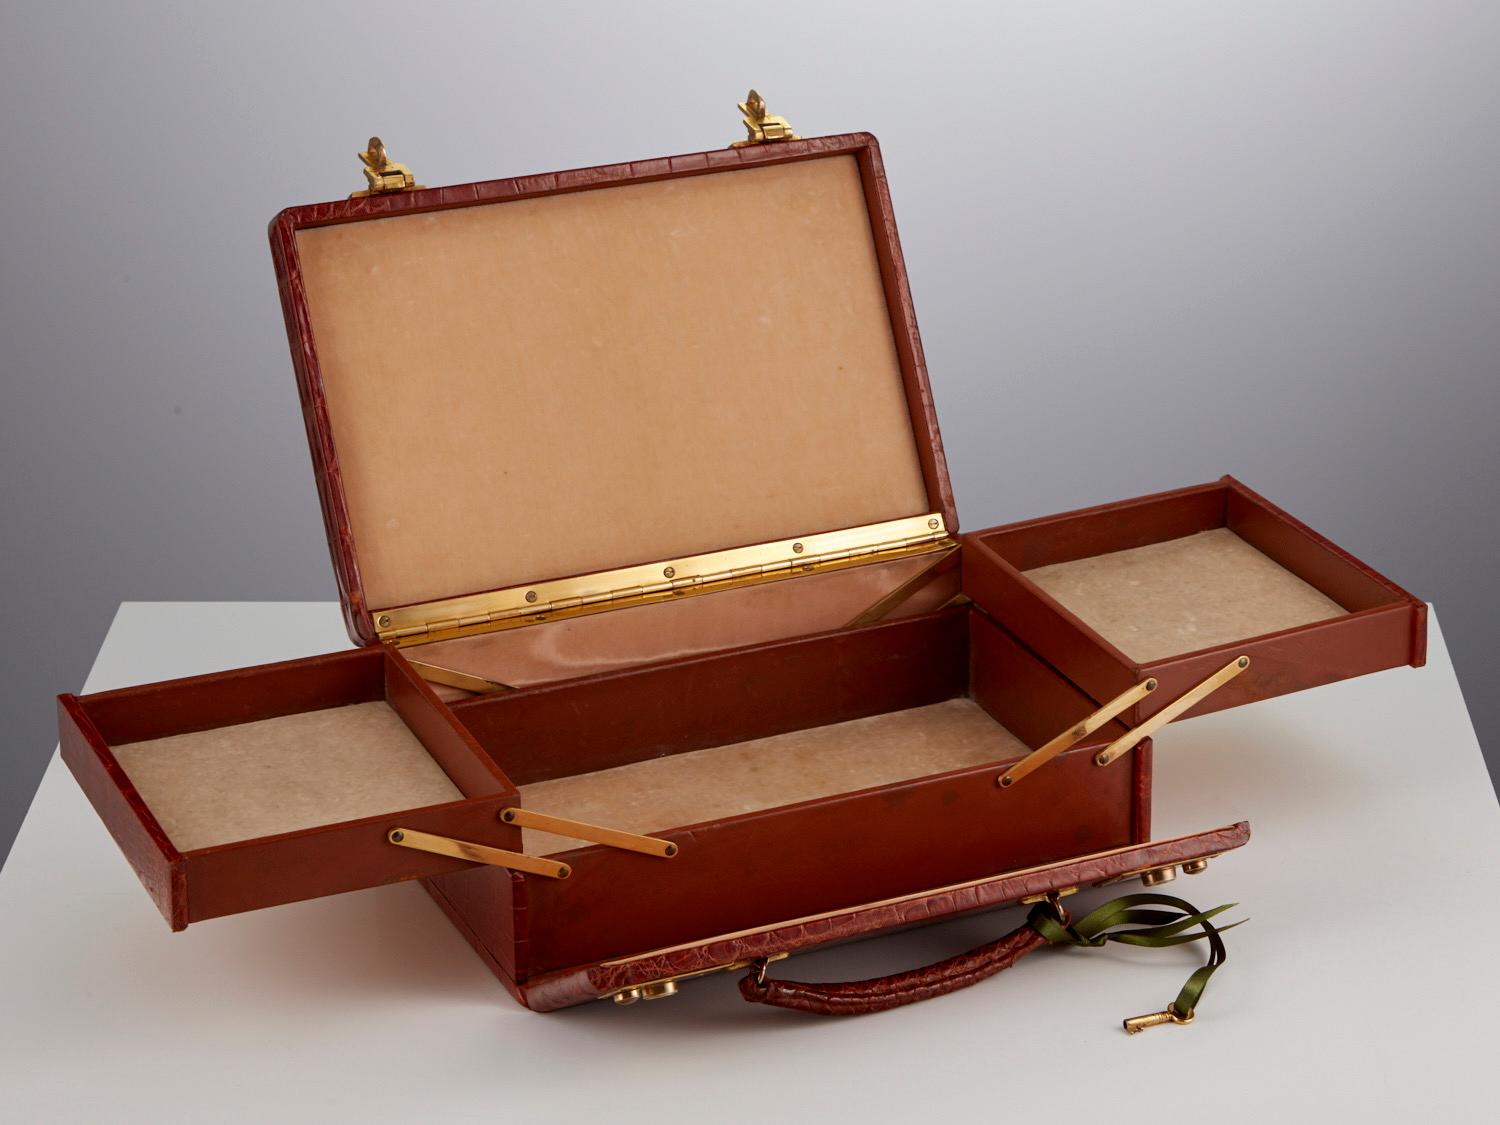 20th Century Antique Tan Crocodile Jewellery Box with Lift Tray Opening London Circa 1918-20 For Sale